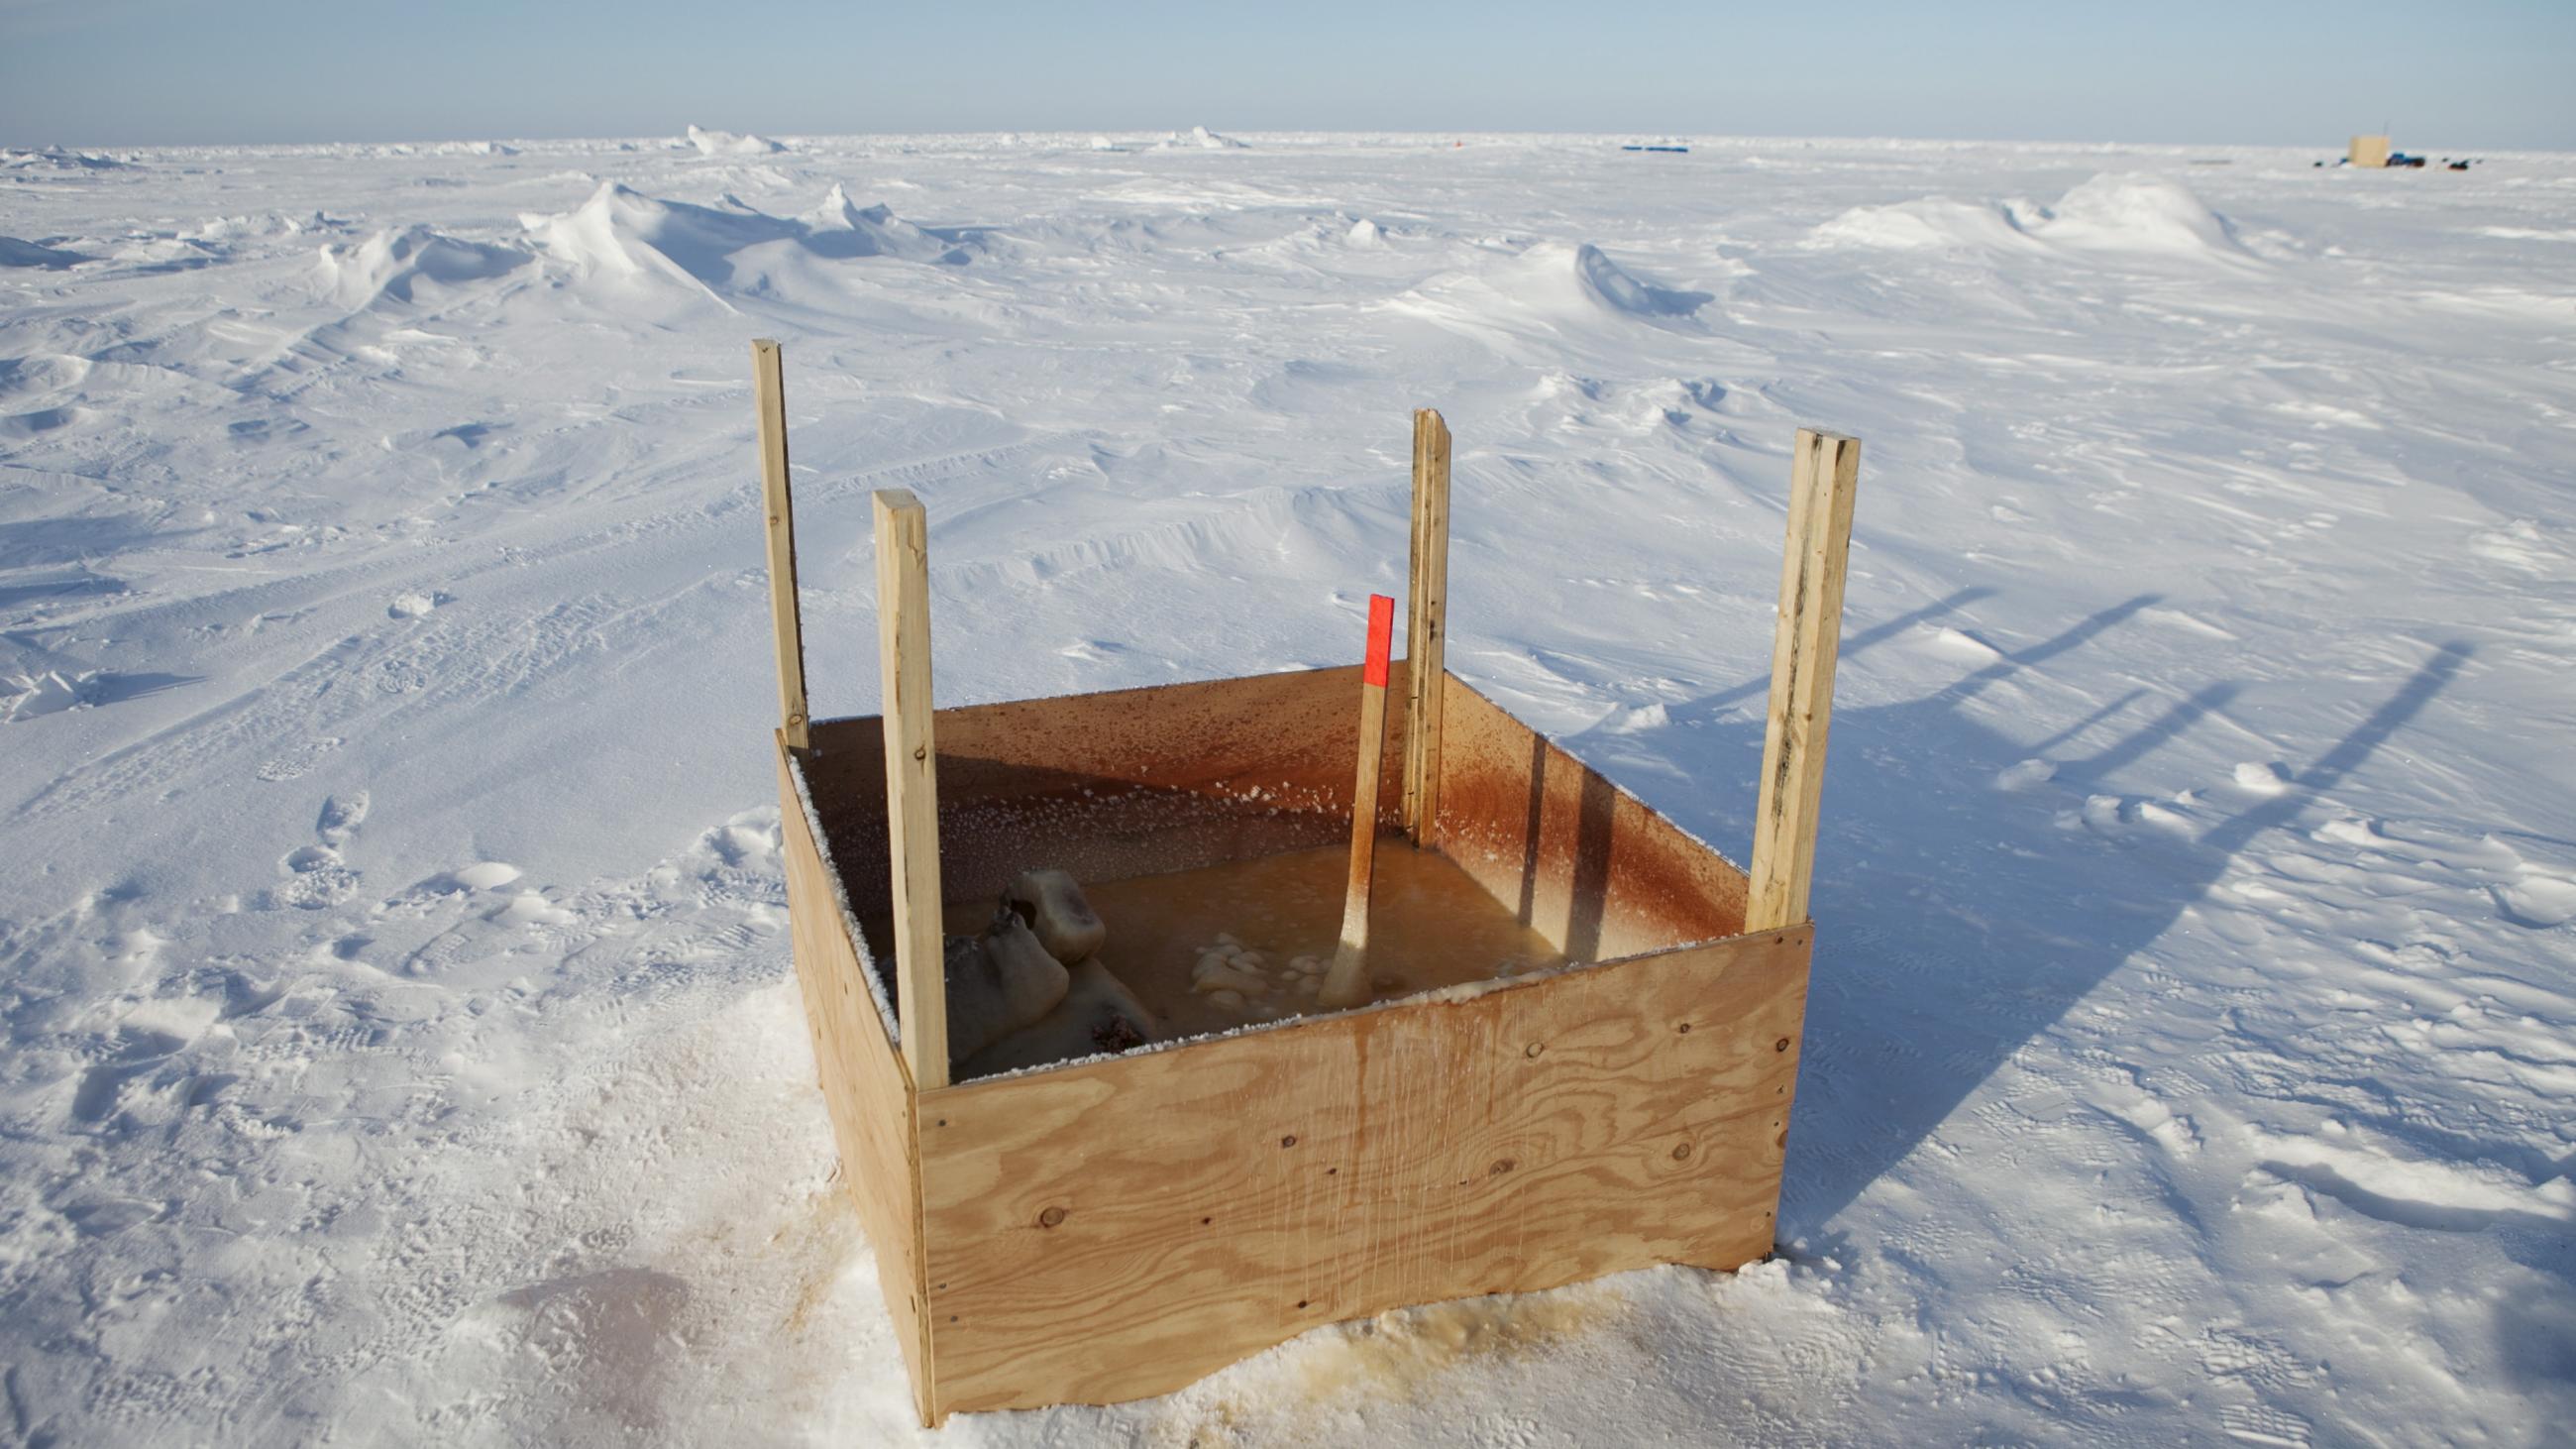 A public toilet stands surrounded by snow near the 2011 Applied Physics Laboratory Ice Station north of Prudhoe Bay, Alaska, March 18, 2011.